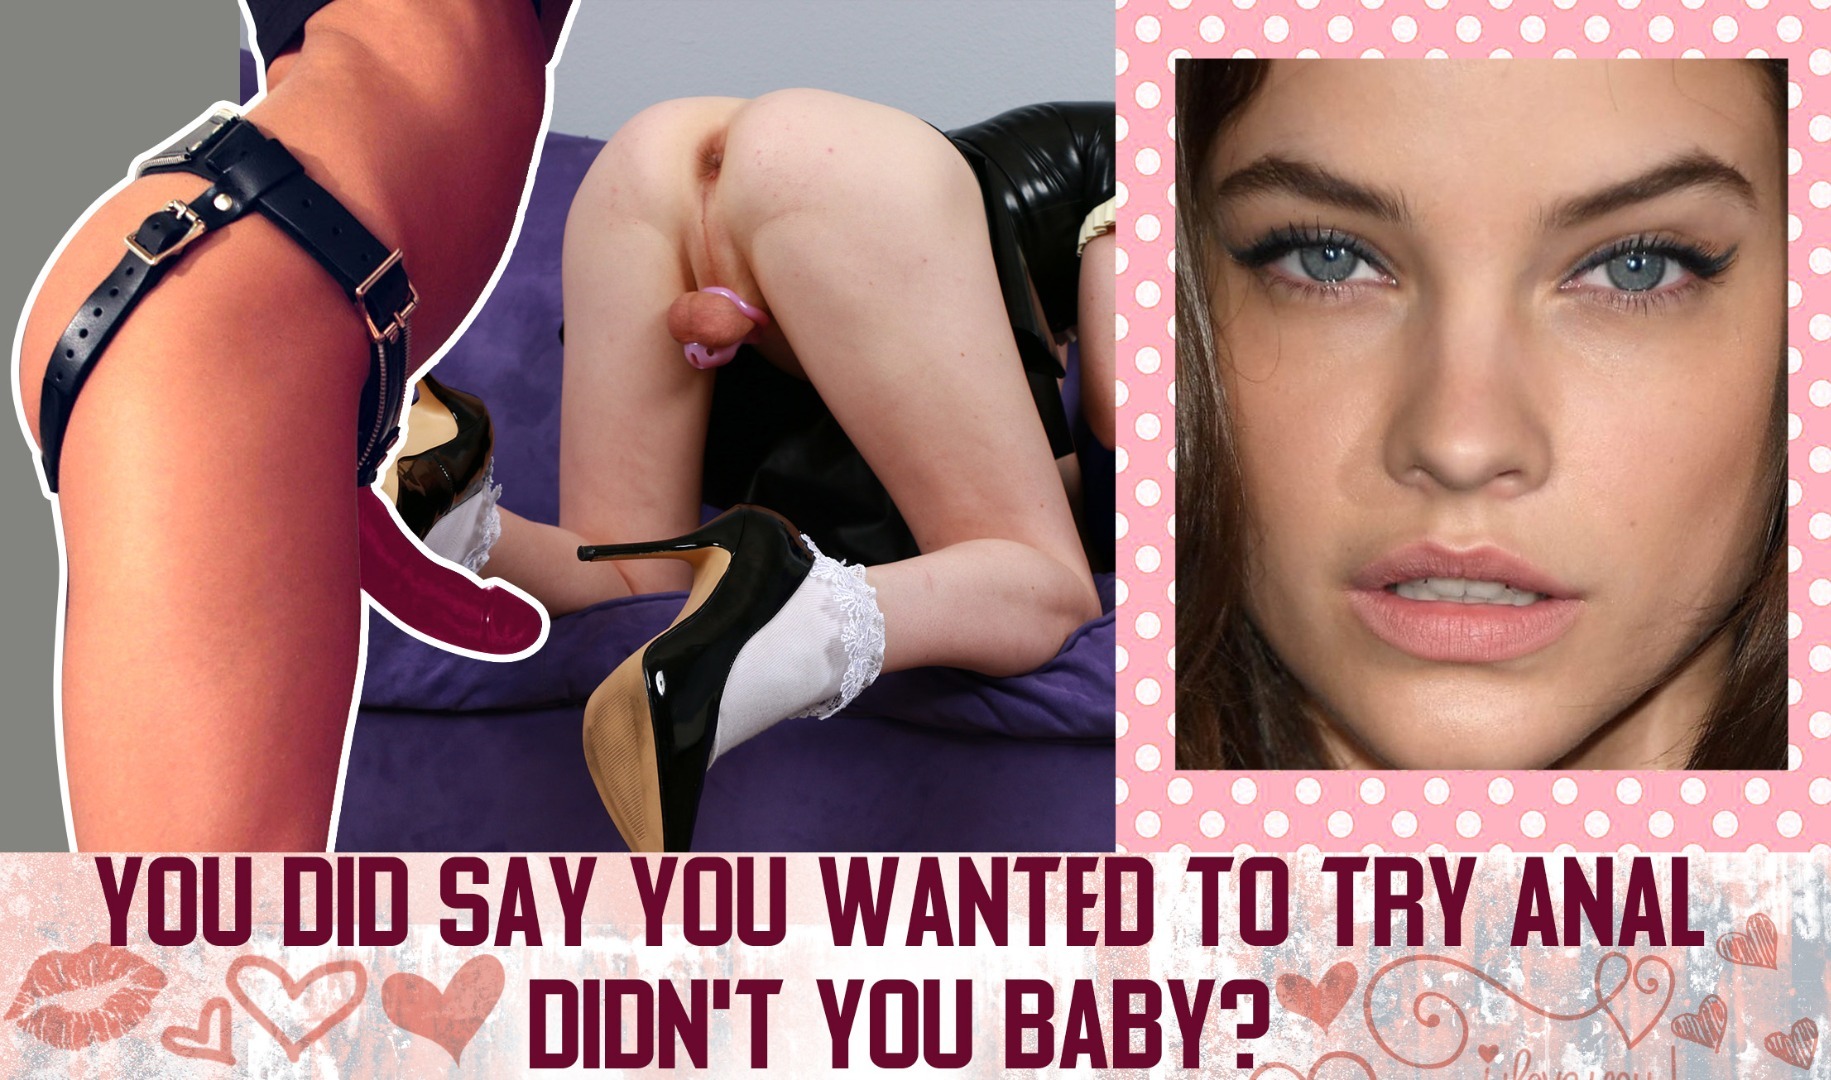 pictures of women with hard nipples BarbaraPalvin, Anal, Bbc, Beautiful, Caption, Chastity, Cuckold, Fake, Femdom, Femdom, Mistress, Queenofspades